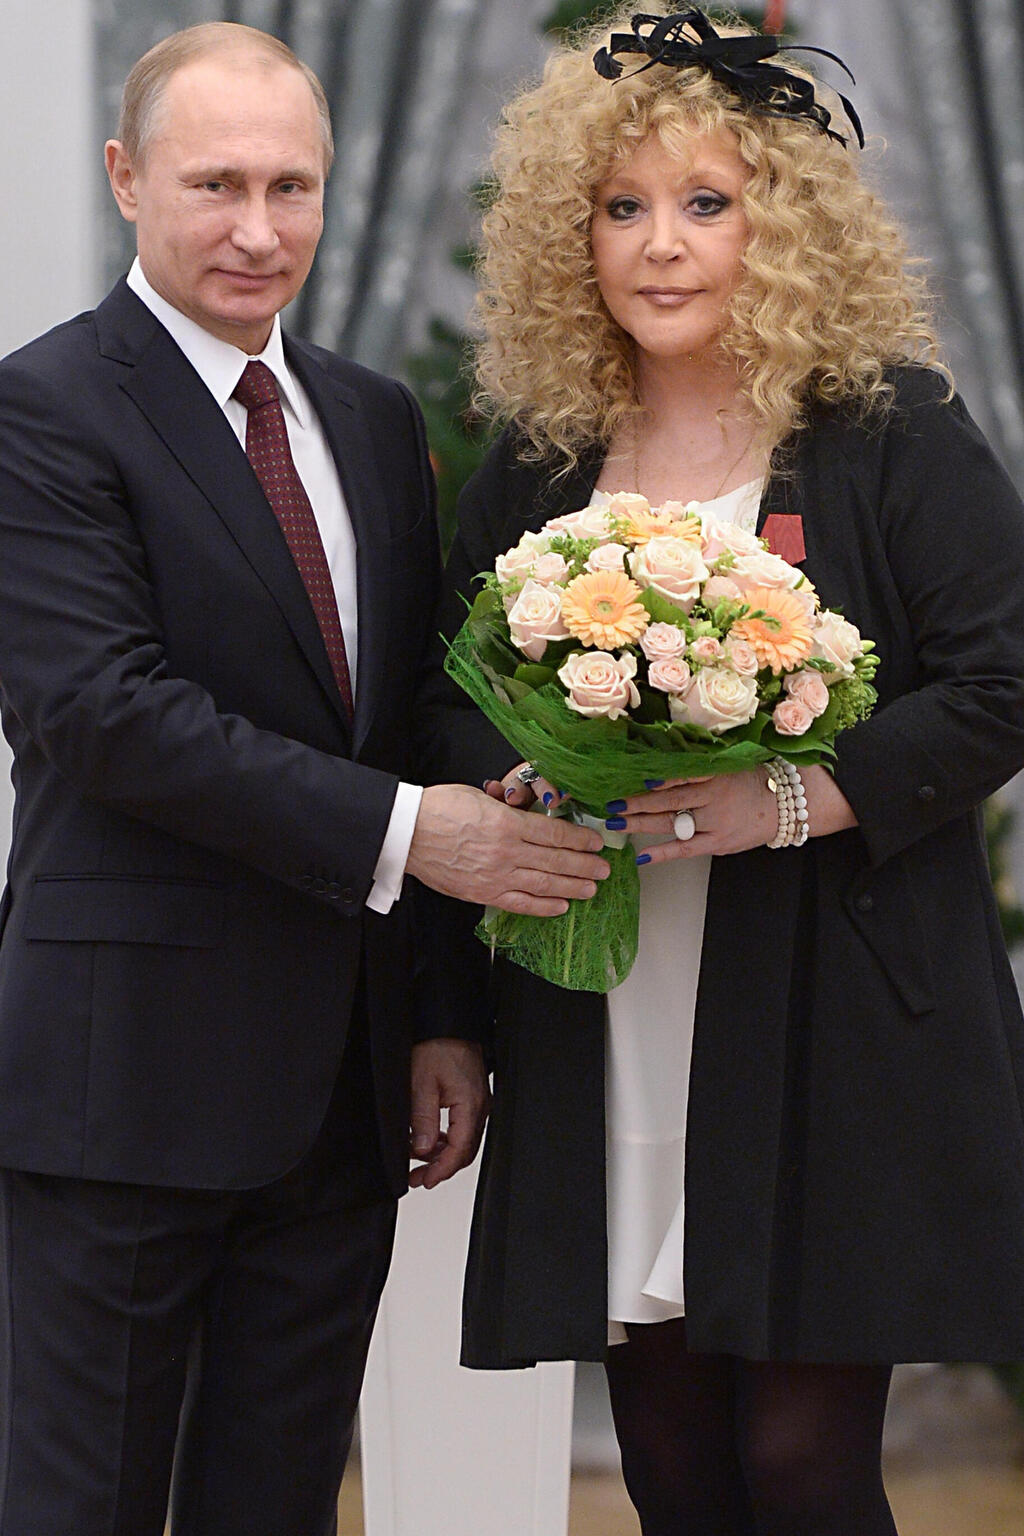 Russian President Vladimir Putin, left, and Russian pop singer Alla Pugacheva pose for a photo during an awards ceremony in Moscow's Kremlin